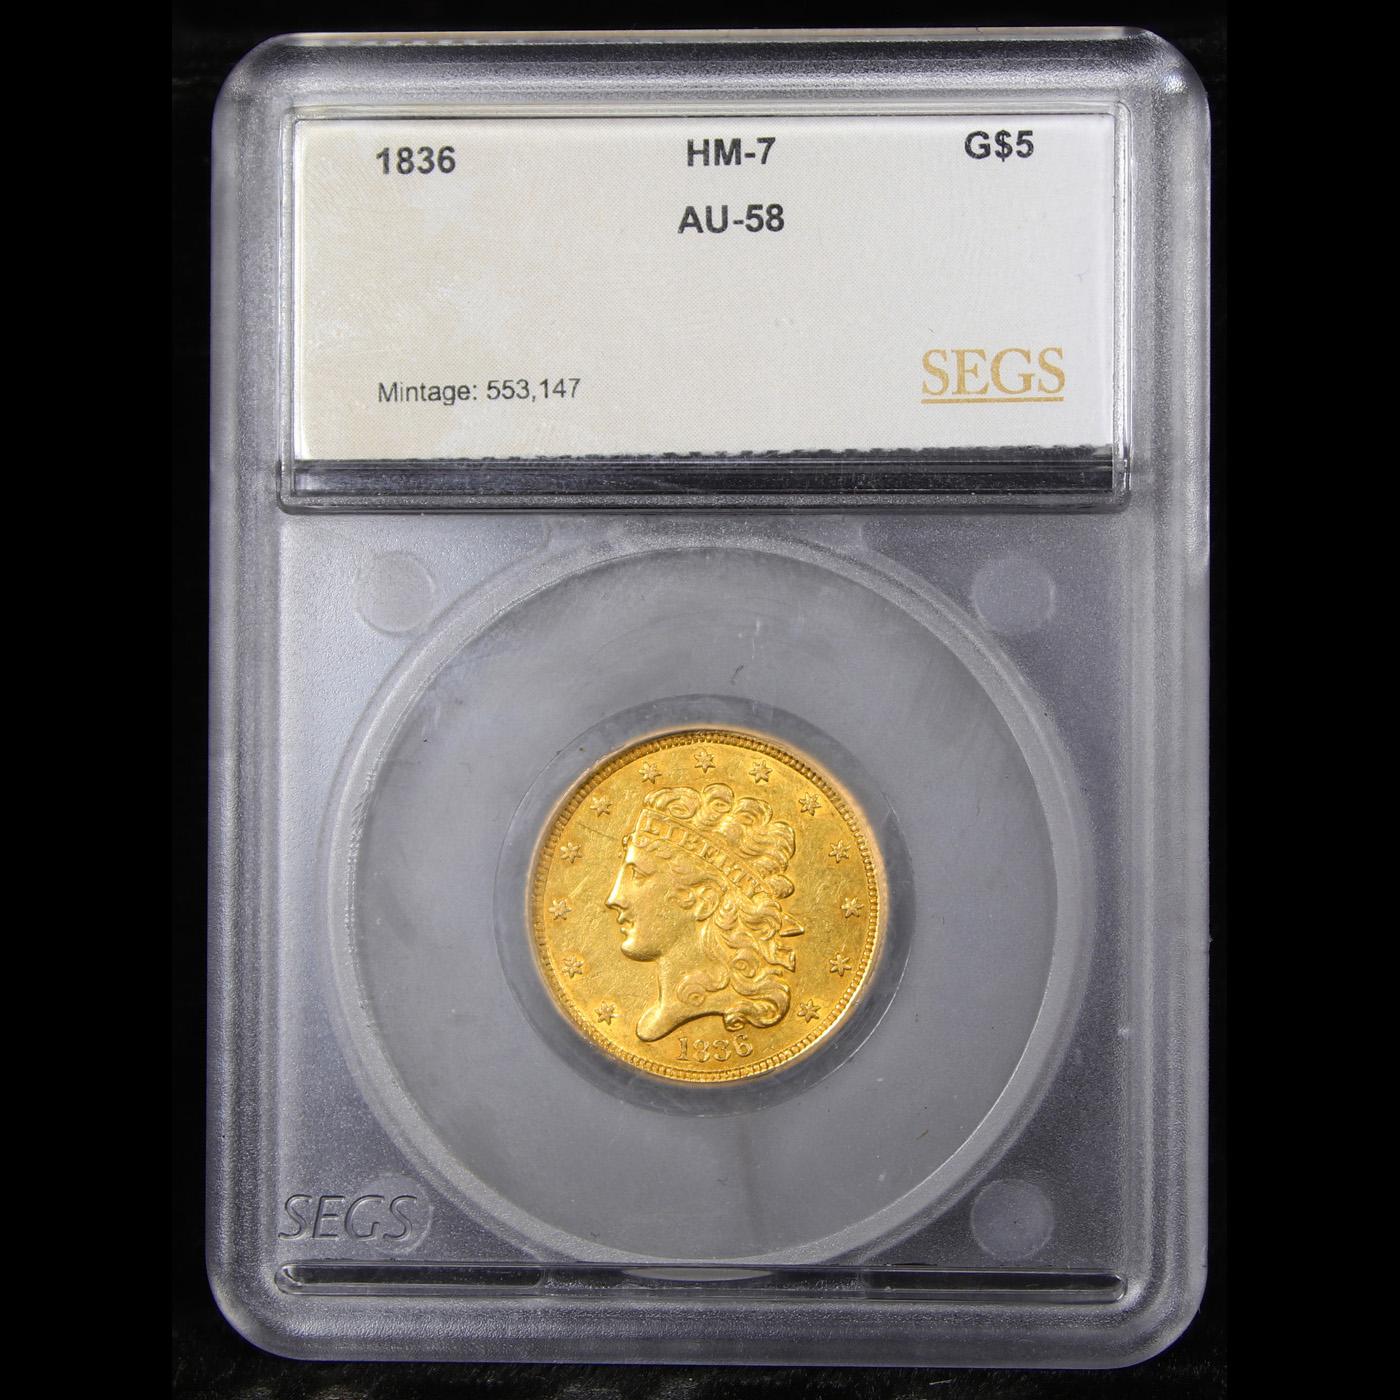 ***Auction Highlight*** 1836-p HM-7 5-G Classic Head $5 Gold Graded au58 By SEGS (fc)